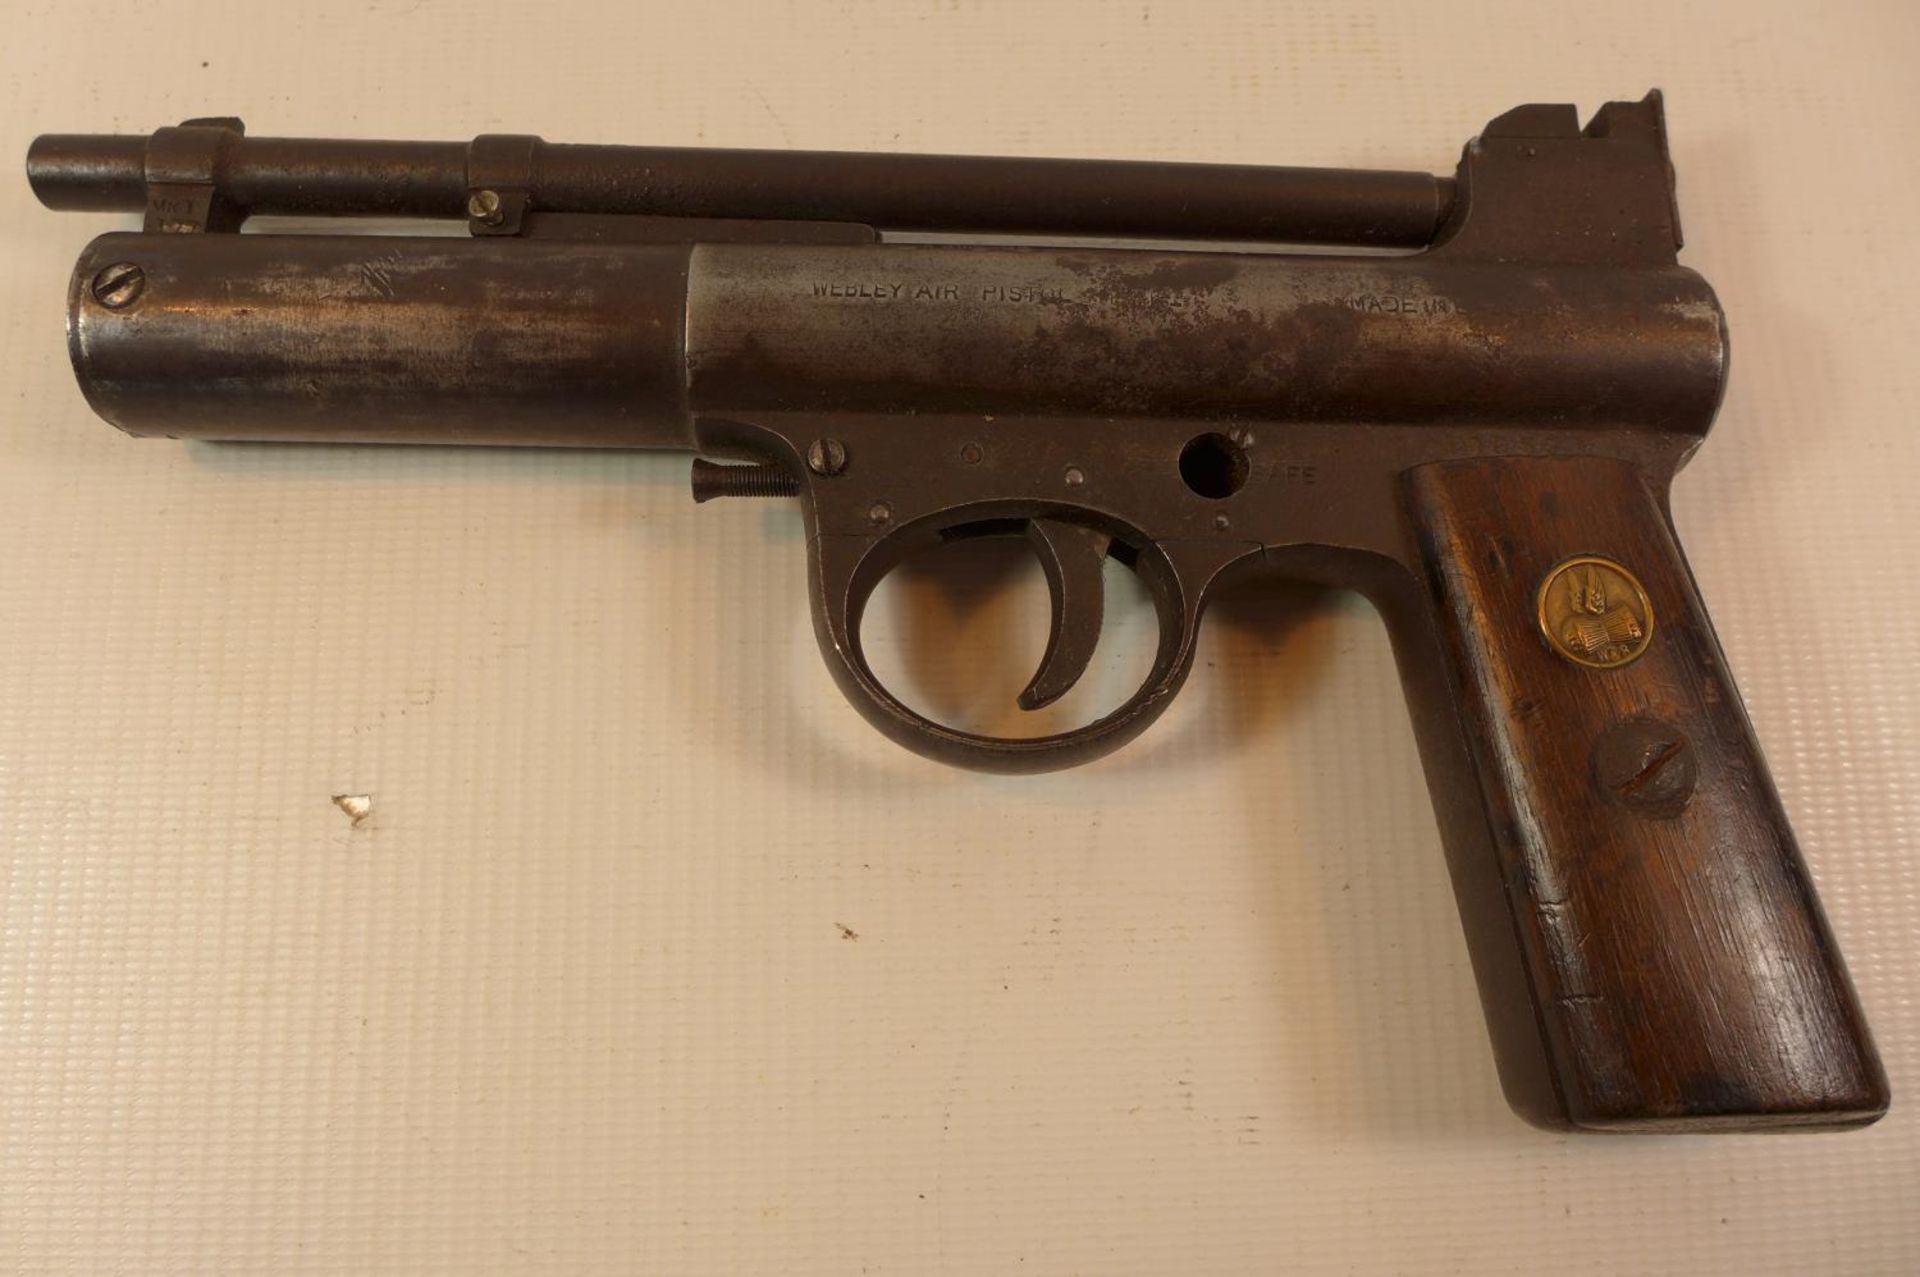 A WEBLEY AND SCOTT MARK I, 177 CALIBRE AIR PISTOL, WITH AN 18CM BARREL LACKING SAFETY.SERIAL